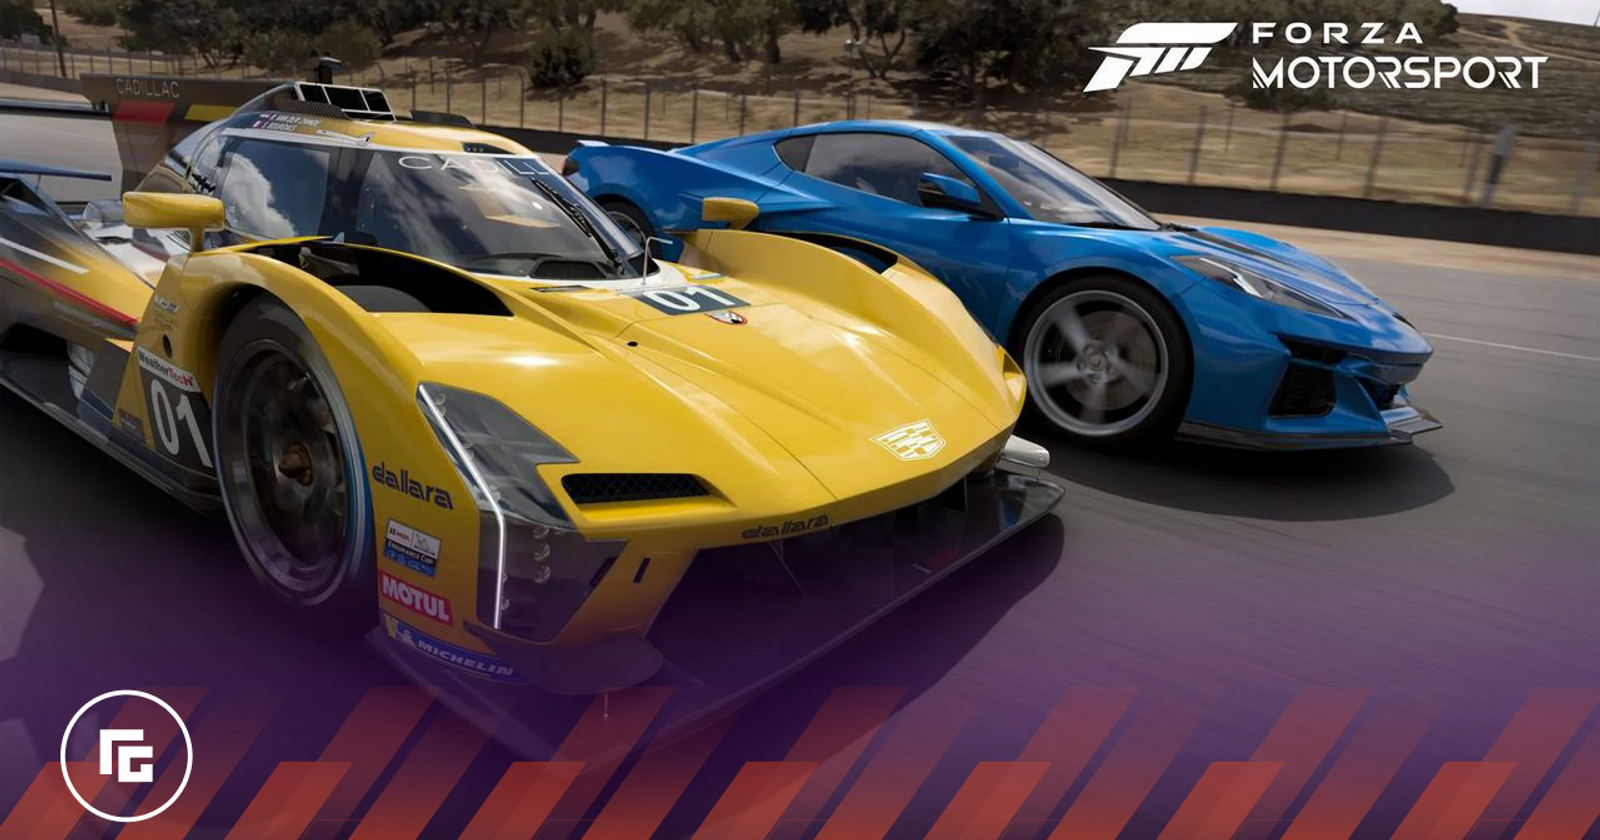 Forza Motorsport 8 details and new features revealed – take a look